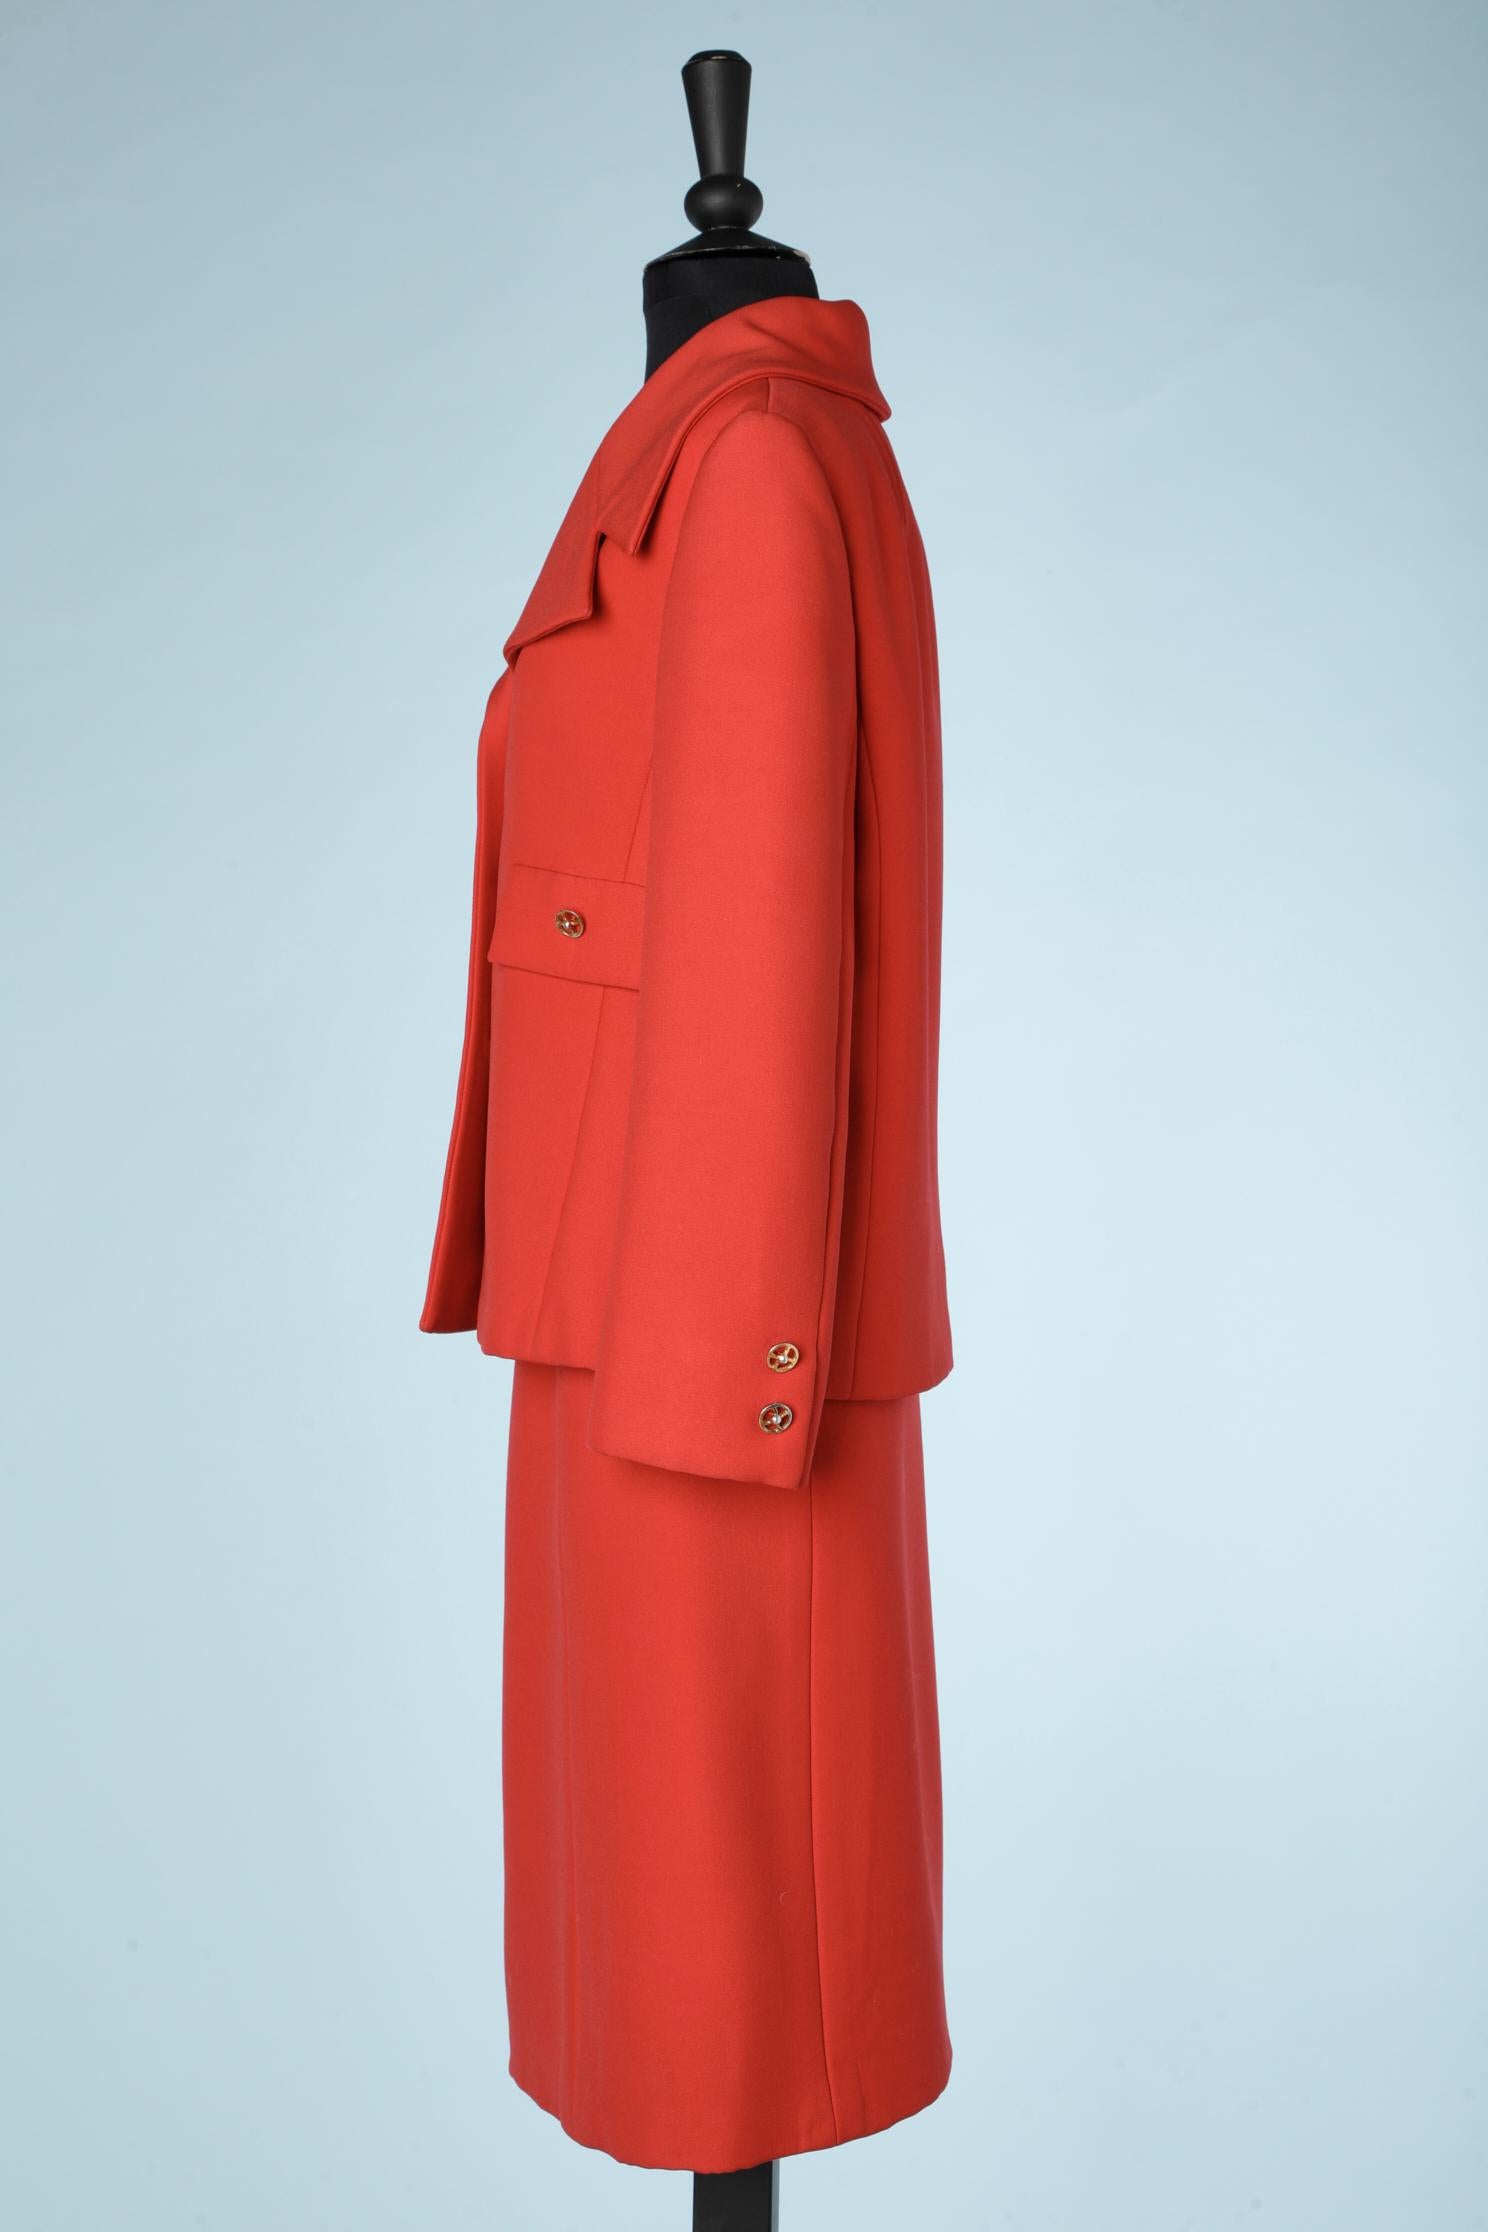 Women's Red wool skirt-suit Christian Dior NY Inc for Bullock's Wilshire